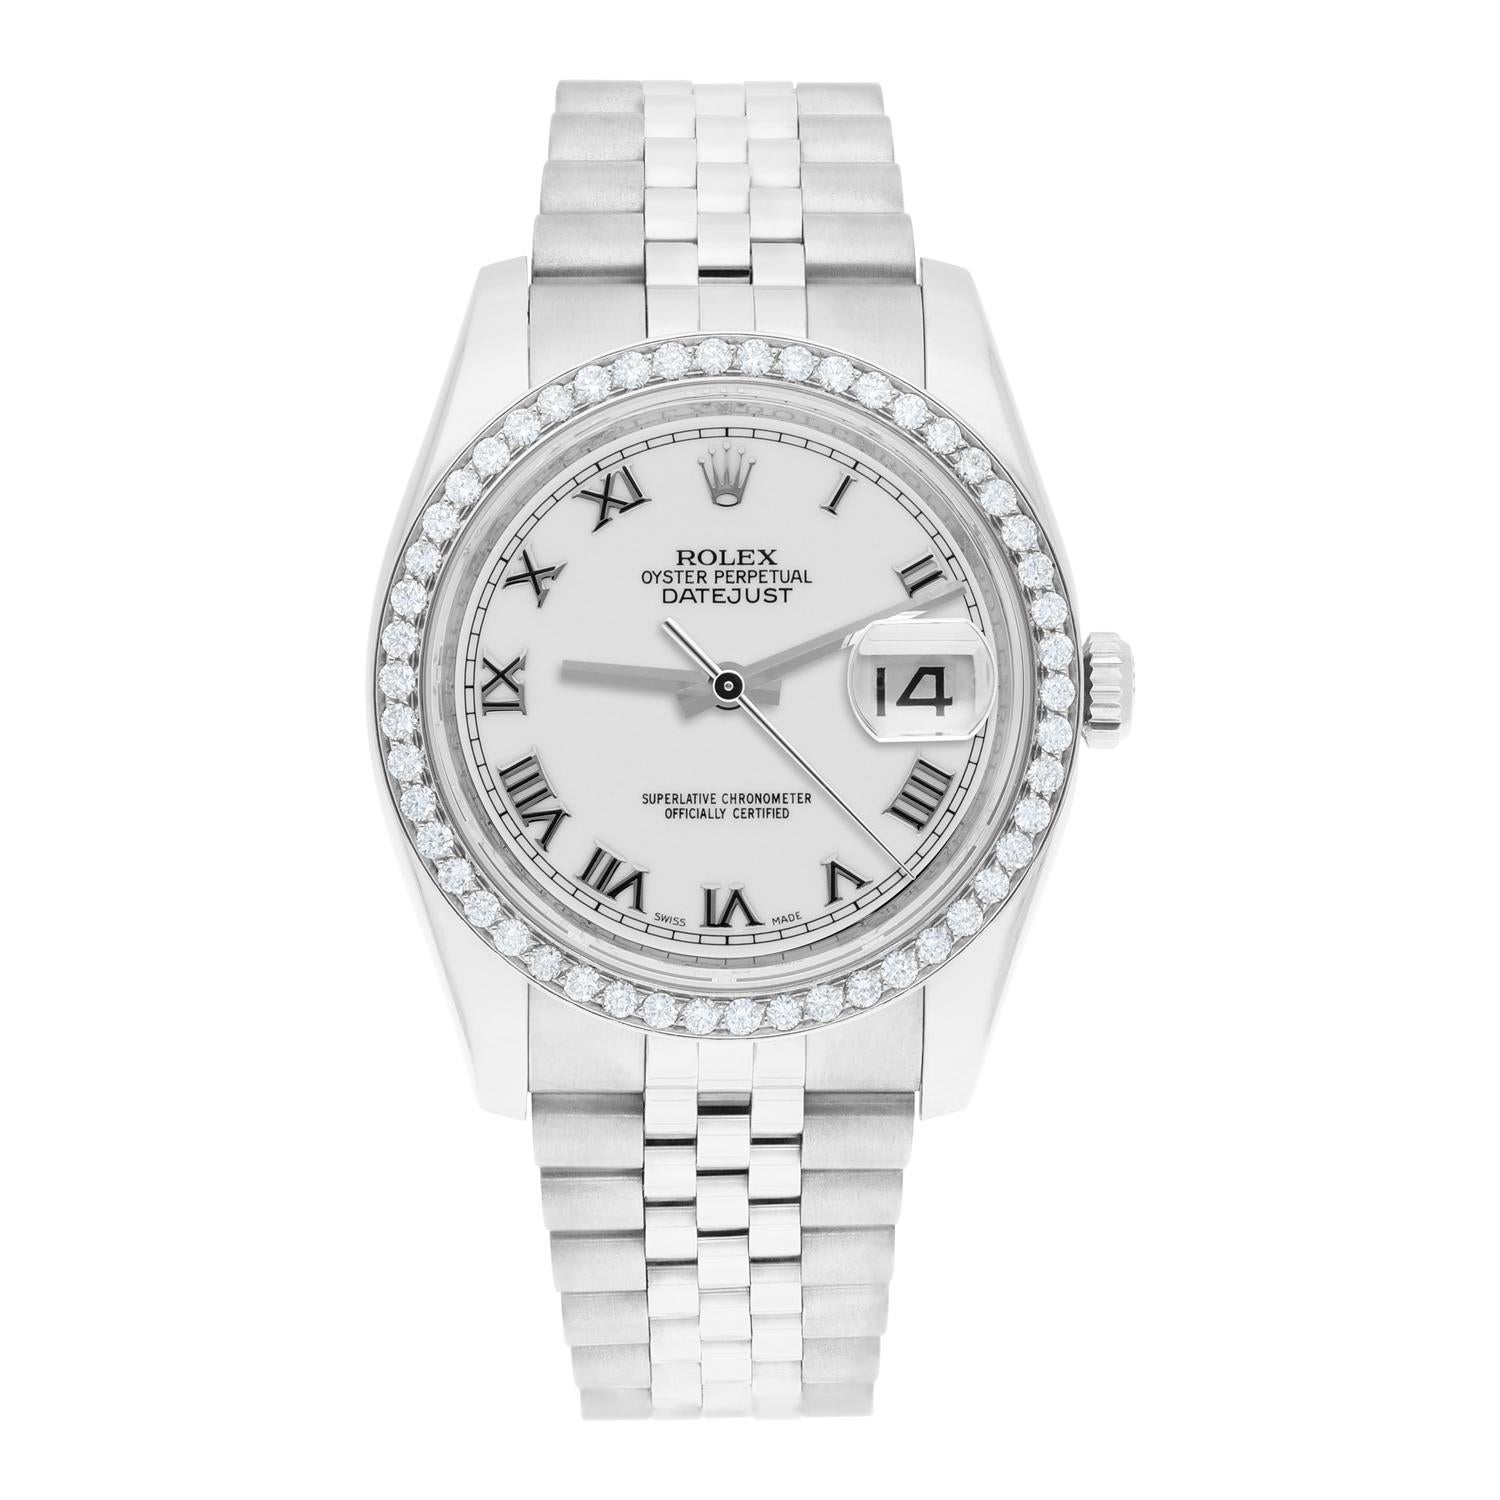 Brand: Rolex
Series: Datejust 
Model: 116234
Case Diameter: 36 mm
Bracelet: Jubilee band; stainless steel
Bezel: Custom Diamond Set
Dial: White Roman
Carat Weight: 1.32 carats in total diamond weight
The sale includes a Rolex box and an appraisal